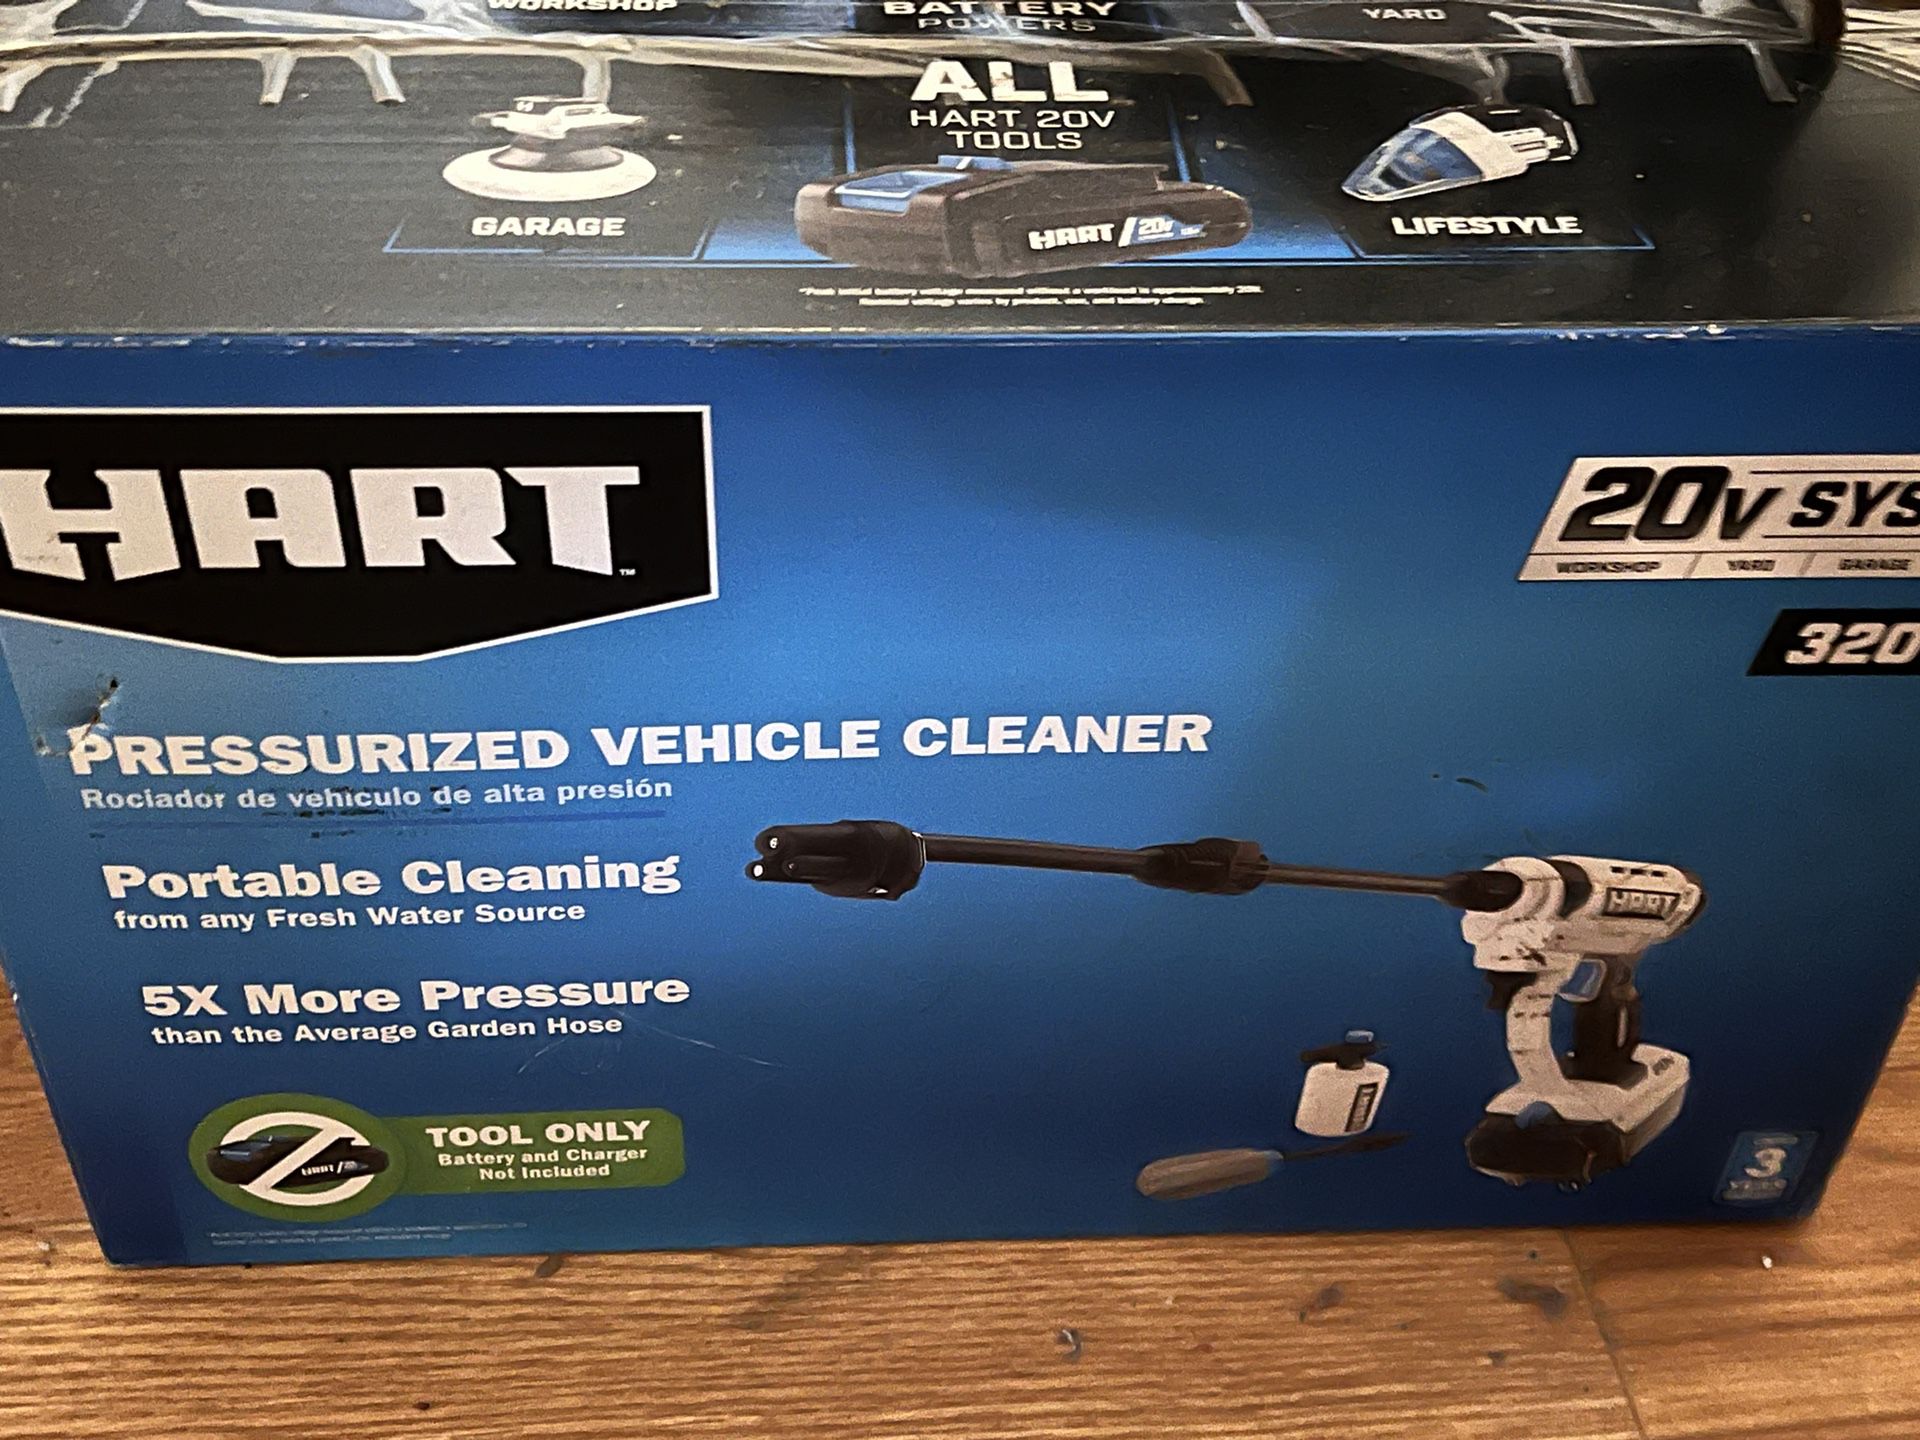 Brand New Pressure Washer. Never Been Used 